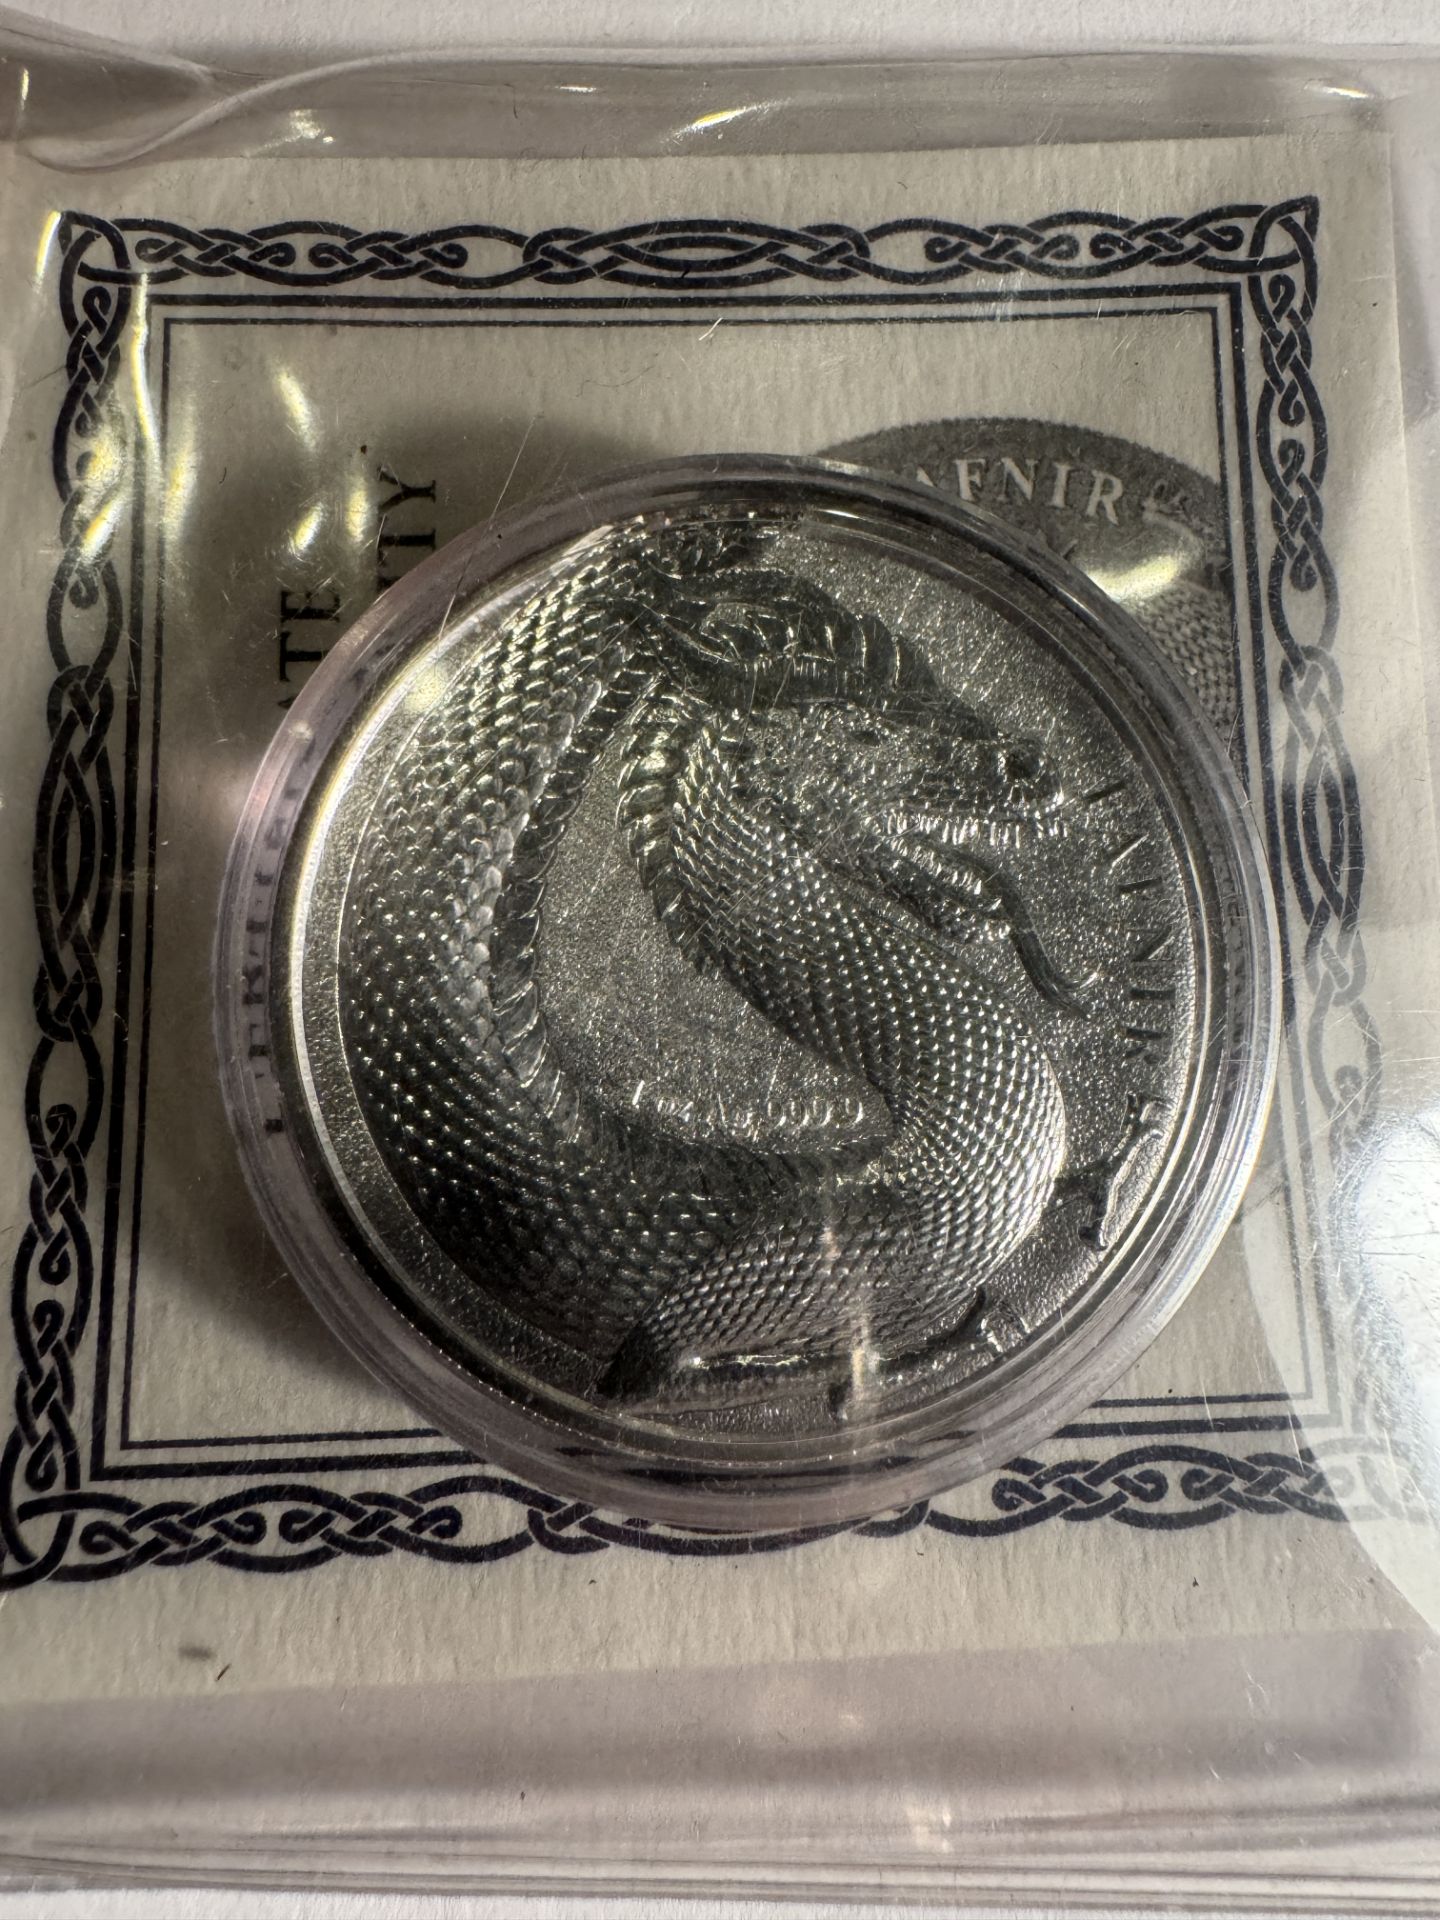 2020 1oz SILVER PIECE GERMANIA BEASTS - Image 2 of 2